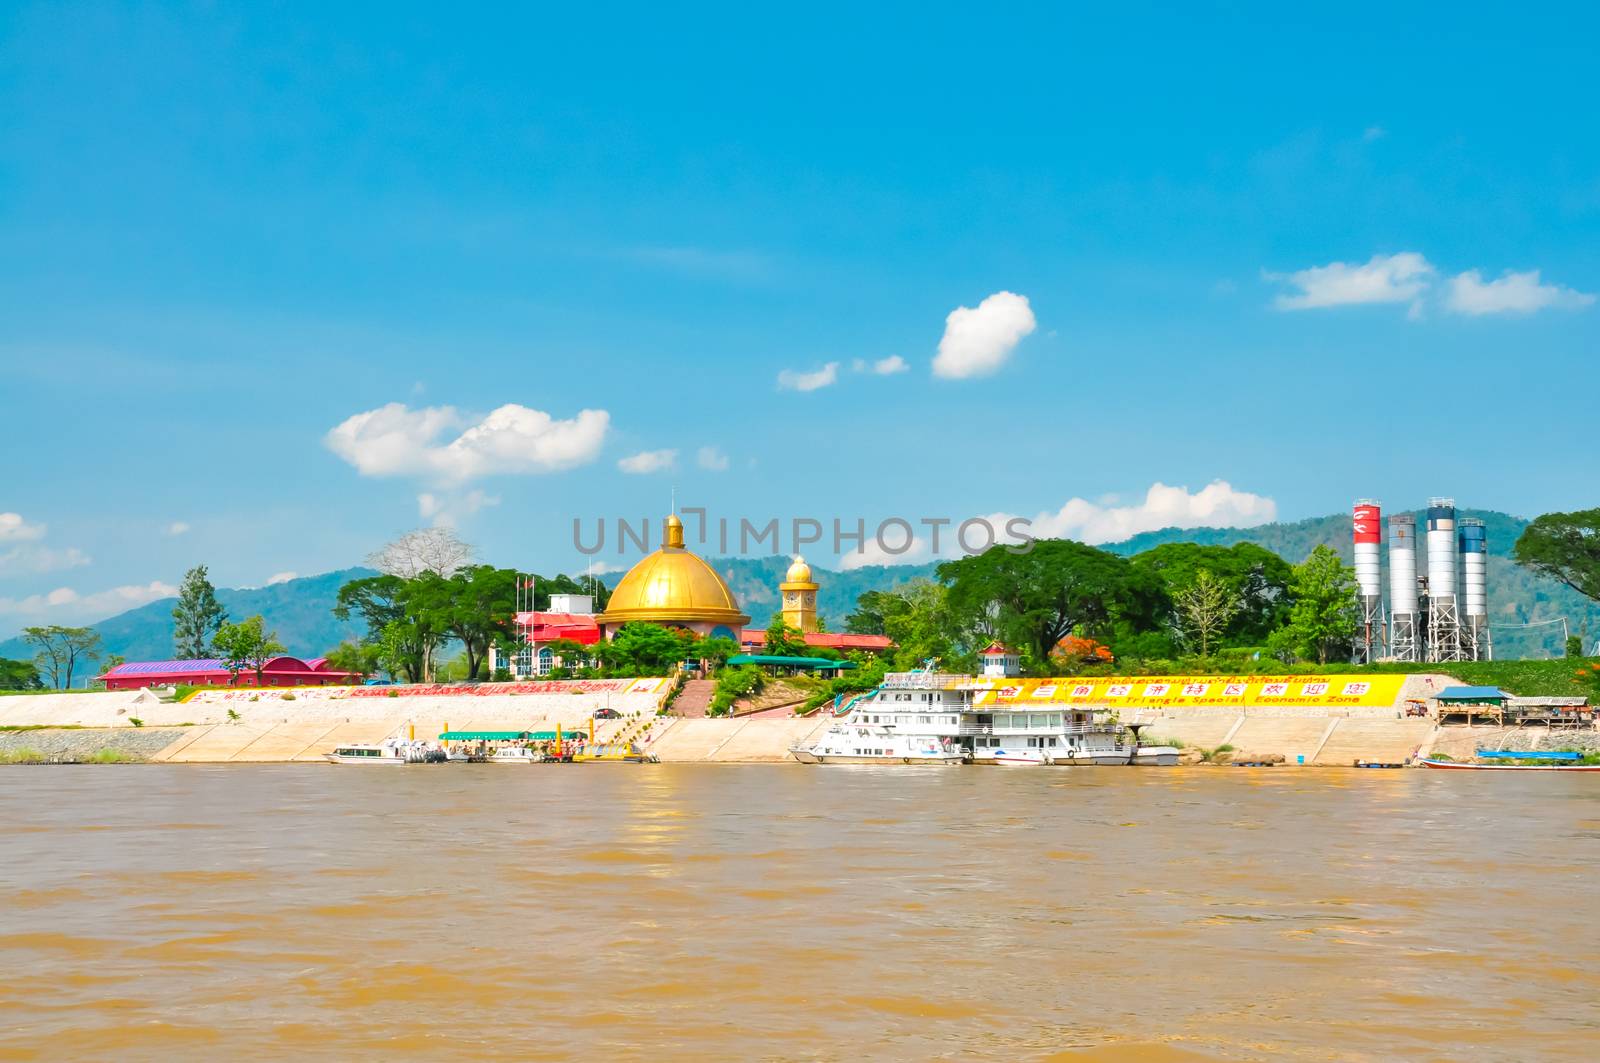 Landscape of the Mekong River at the Golden Triangle, border with Thailand and Laos.